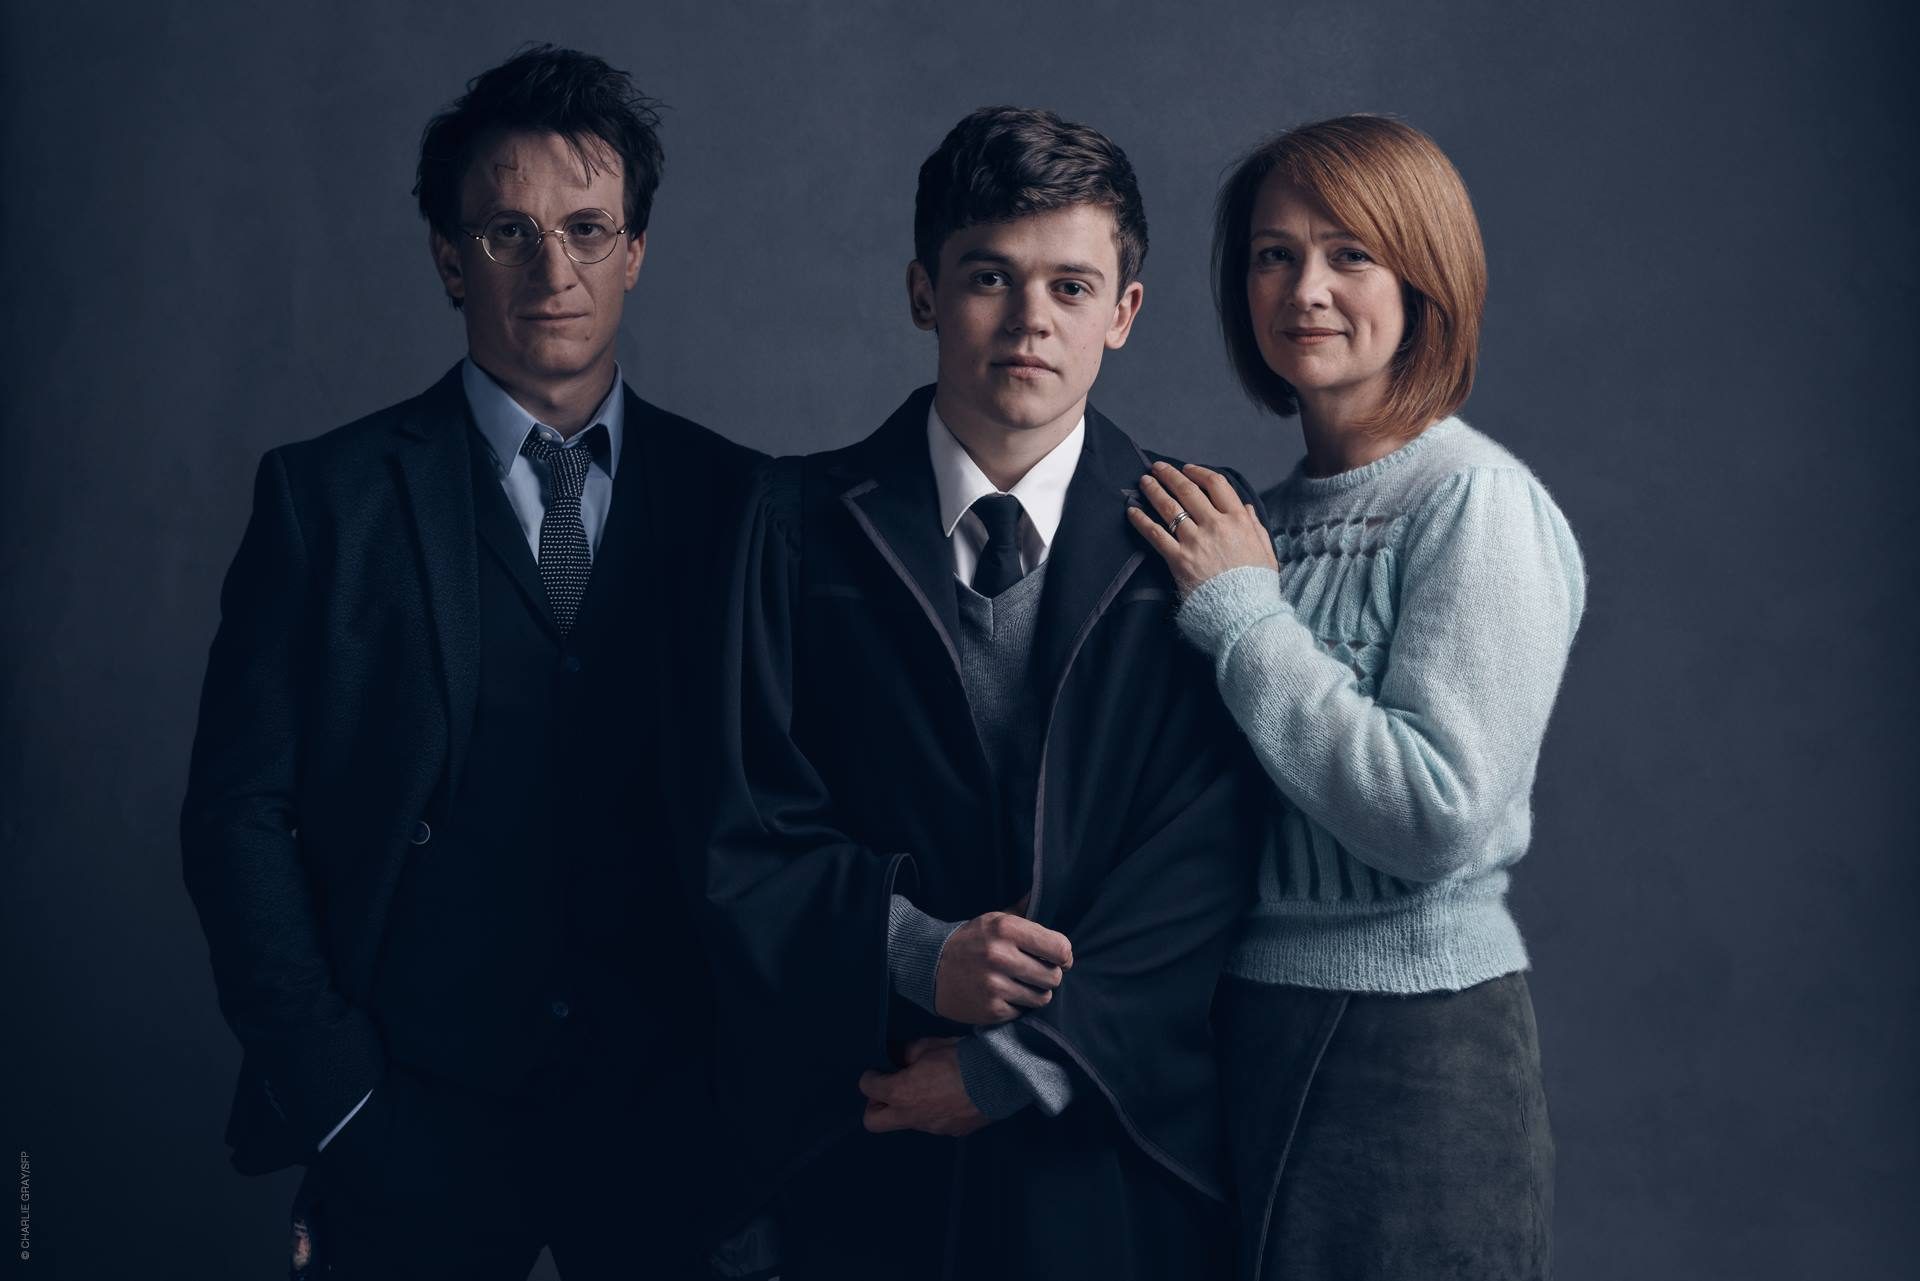 LOOK: Harry Potter, Ginny, Albus Severus in new ‘Cursed Child’ photos